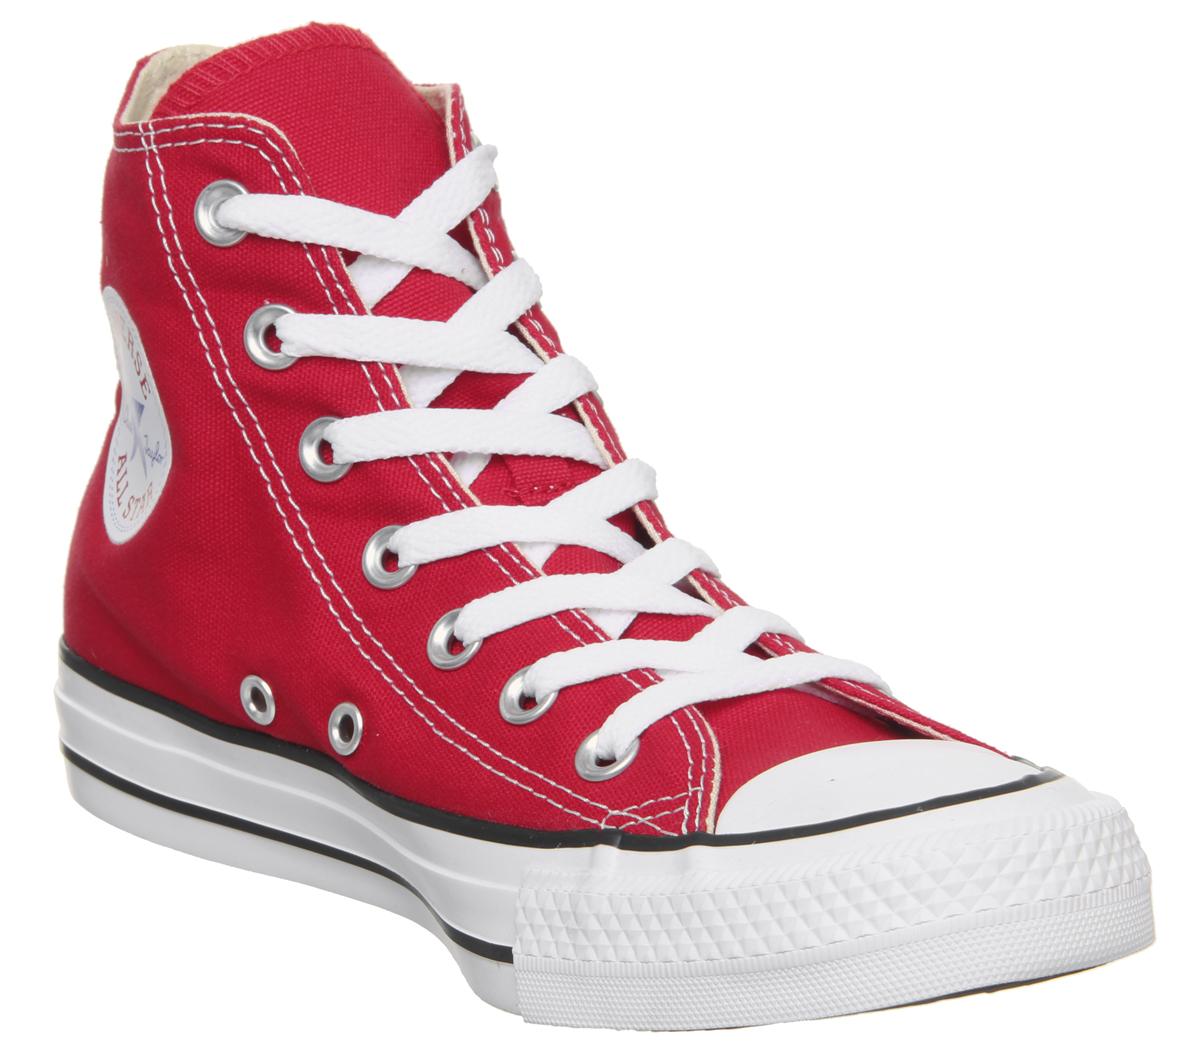 red converse size 6